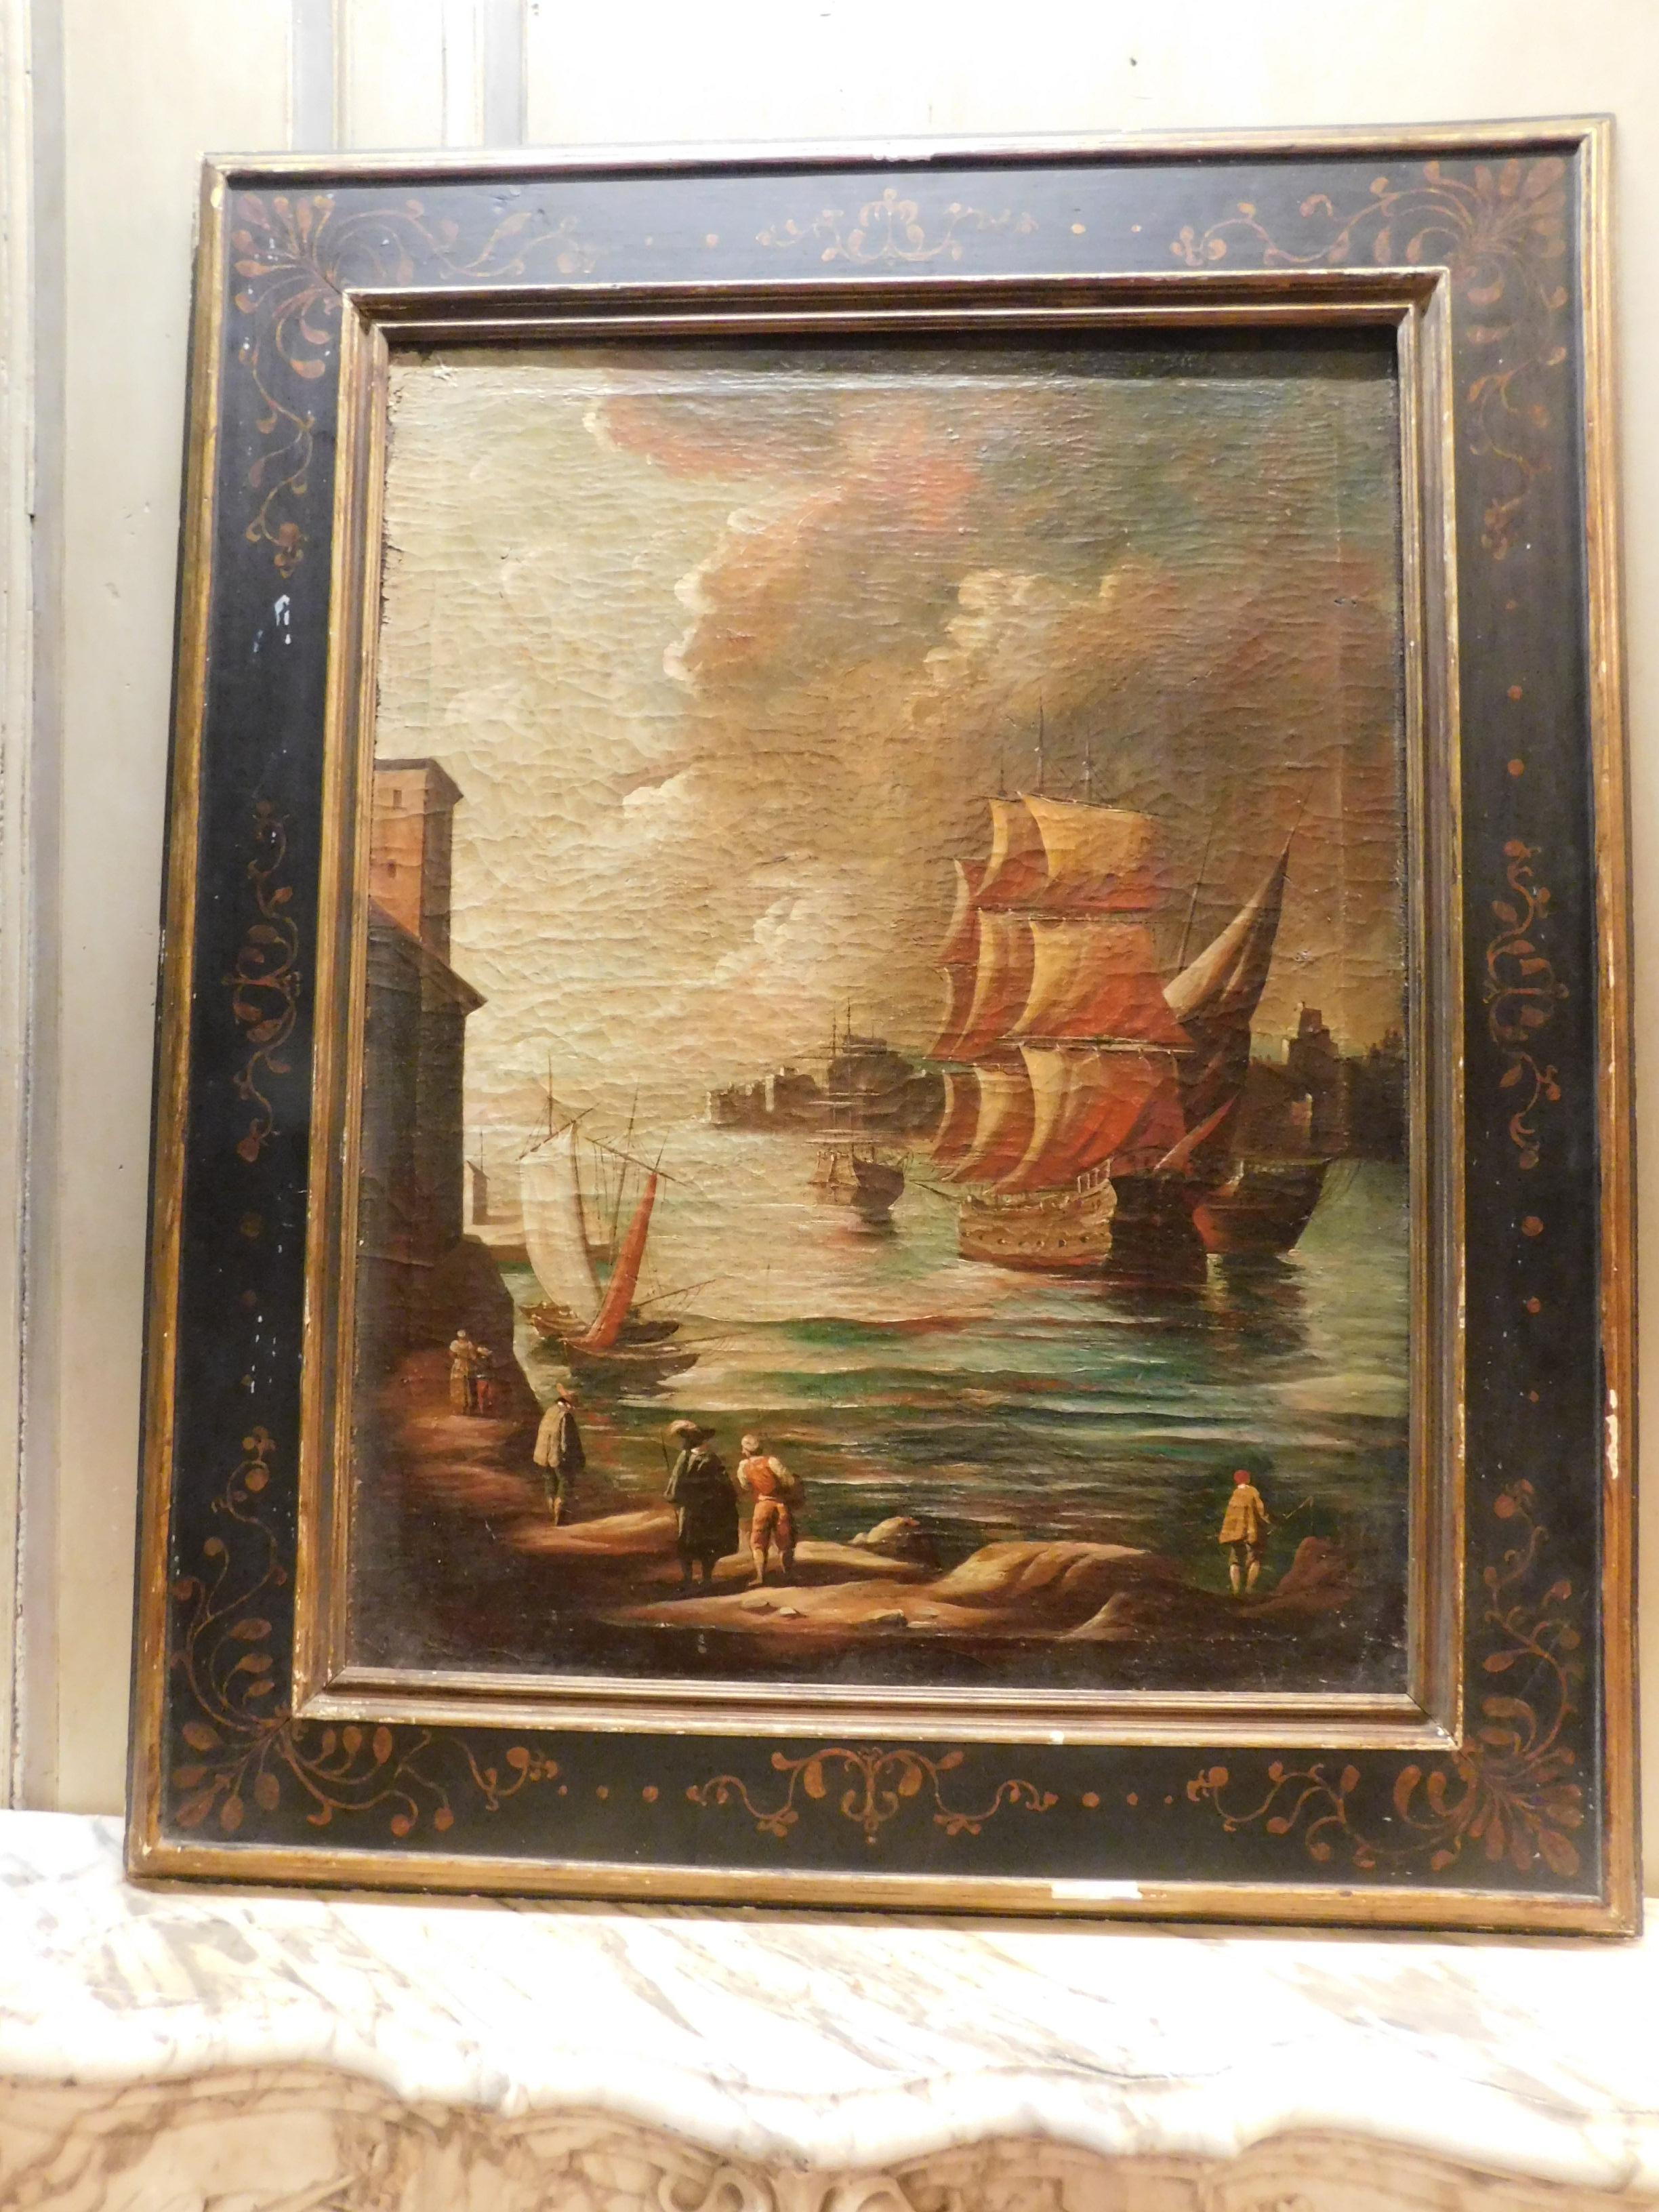 Ancient pair of paintings, in oil on canvas, both have subjects with views of seascapes, complete with ancient and original hand-painted wooden frame, coeval from the 18th century, made in Italy.
each one measures cm w 94 x h 112.
Very nice in